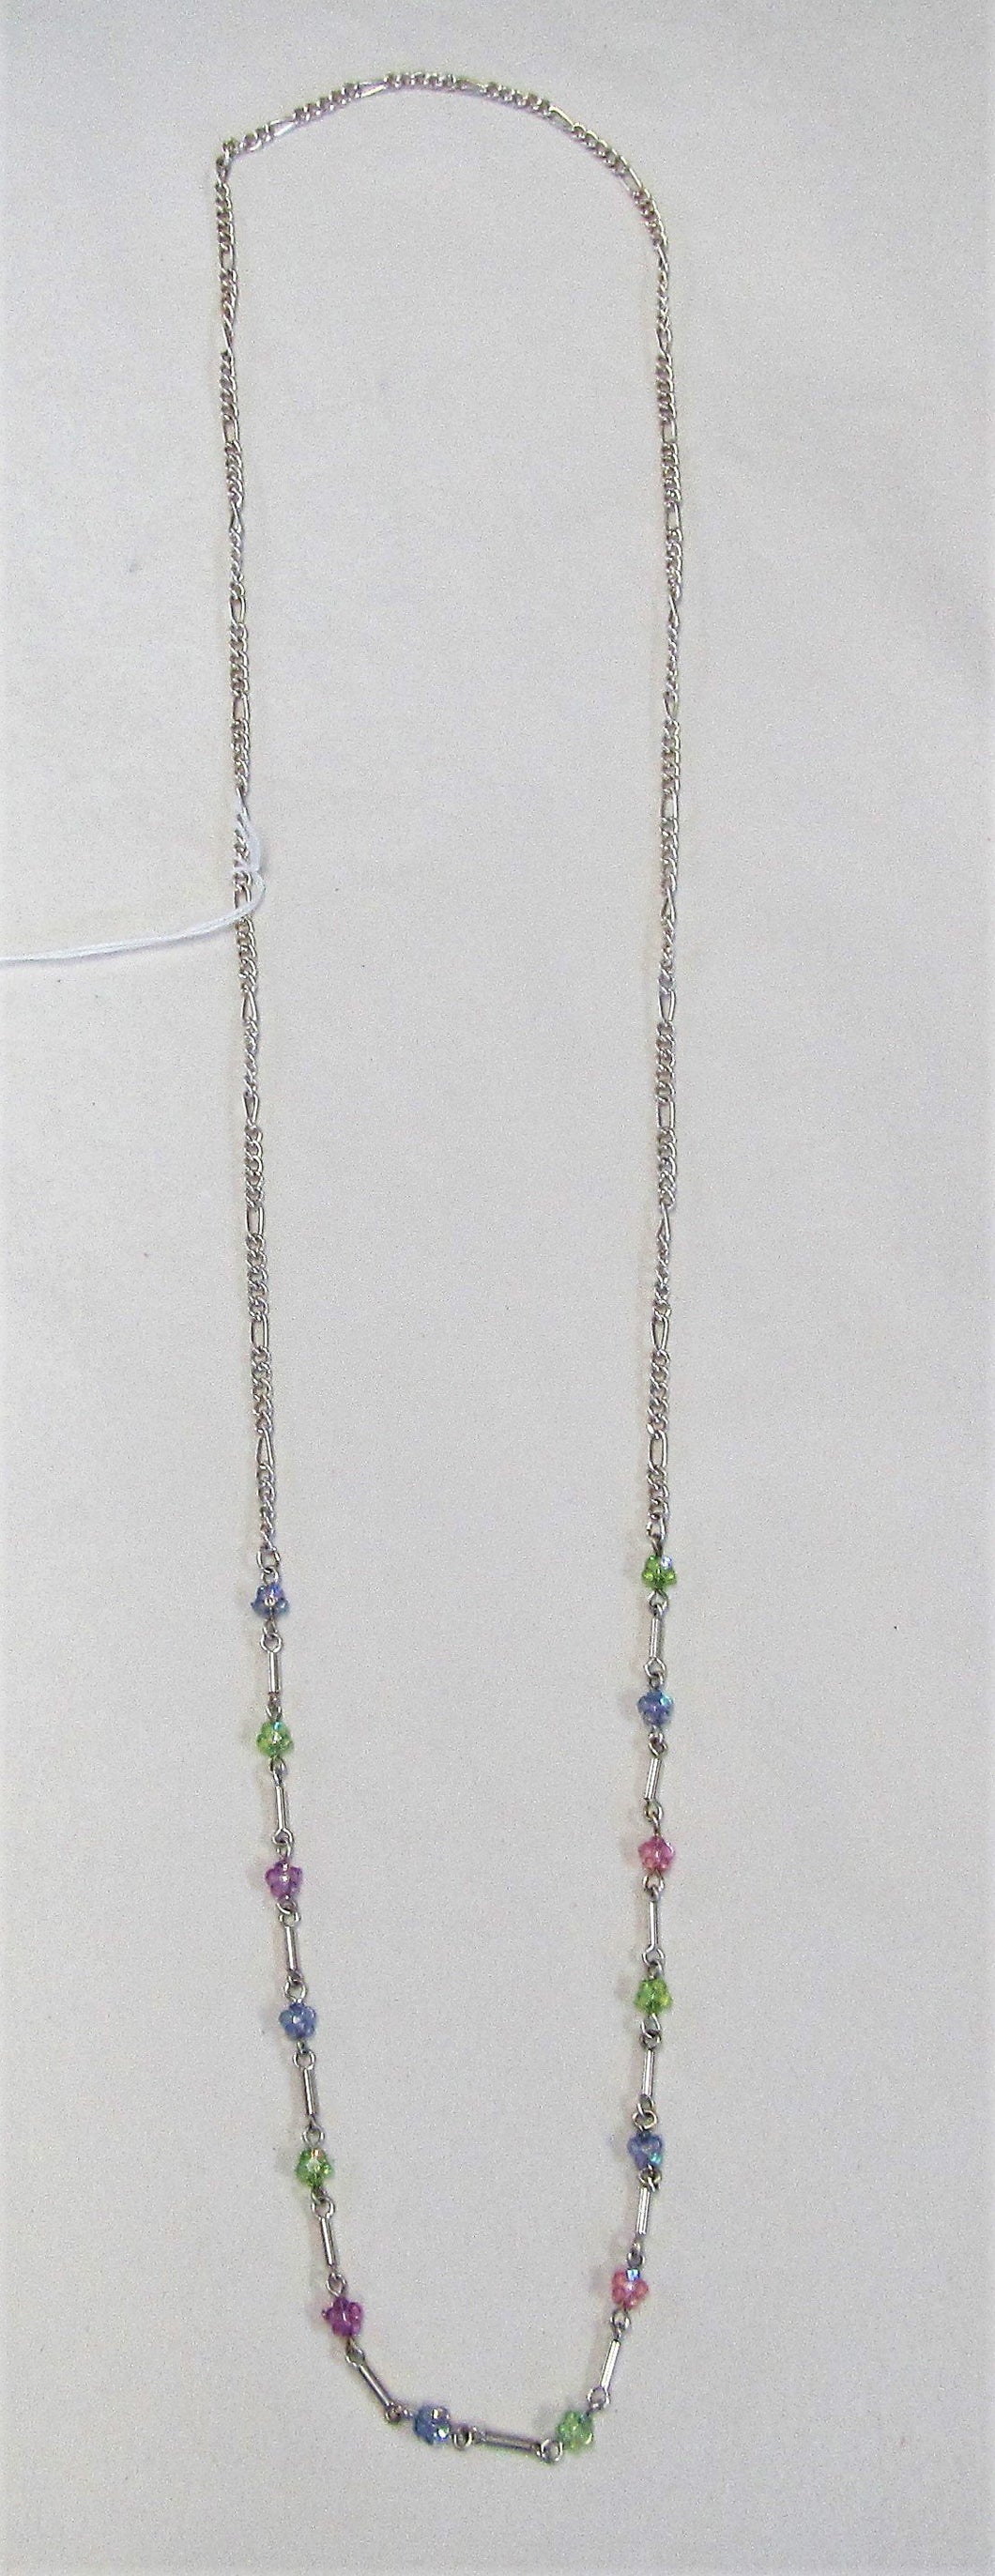 Handcrafted chain with flower beads necklace